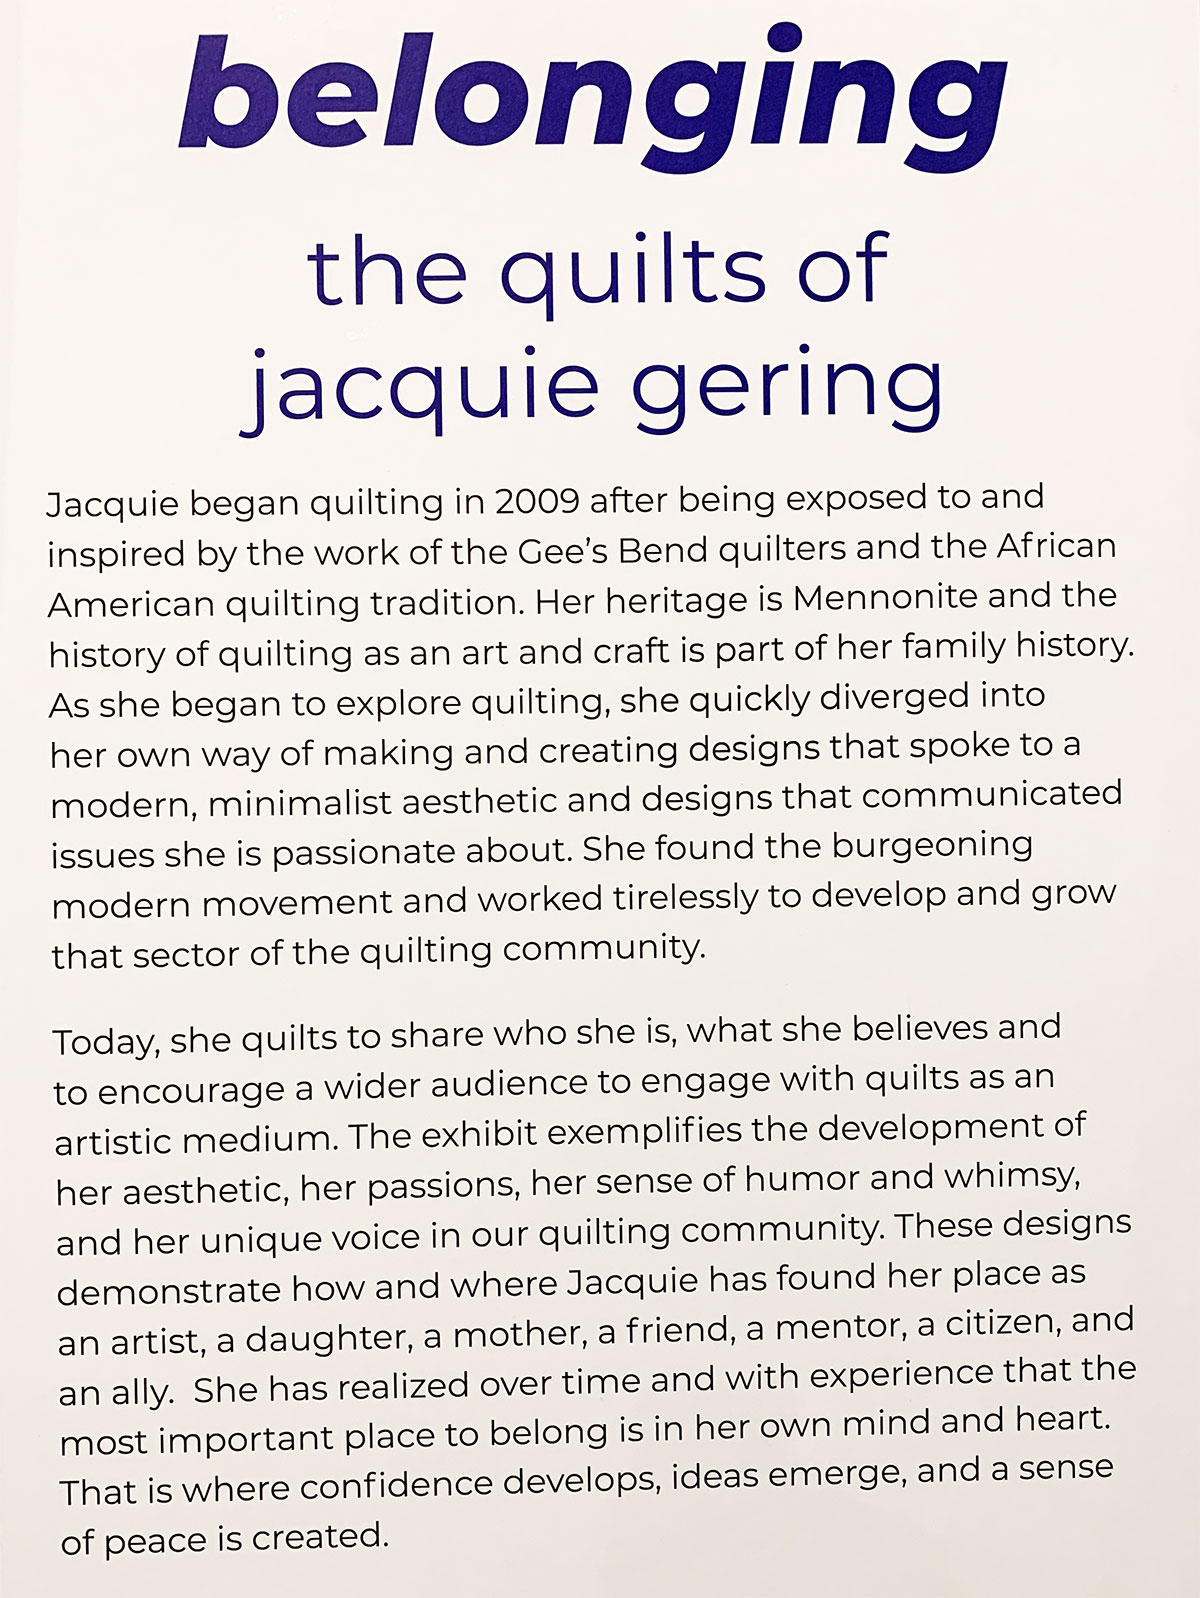 graphic panel for Belonging—the quilts of jacquie gering exhibit